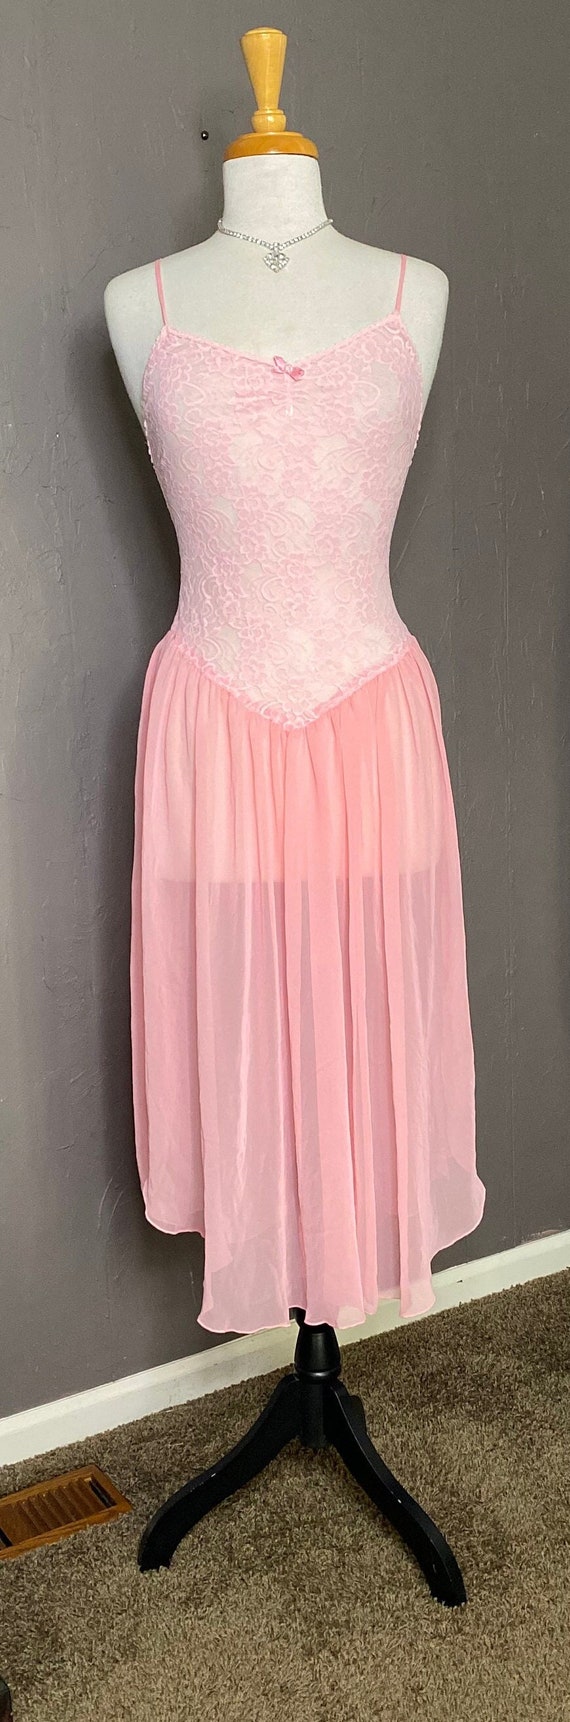 1980’s Pink Lace and Chiffon Nightgown by Morgan T